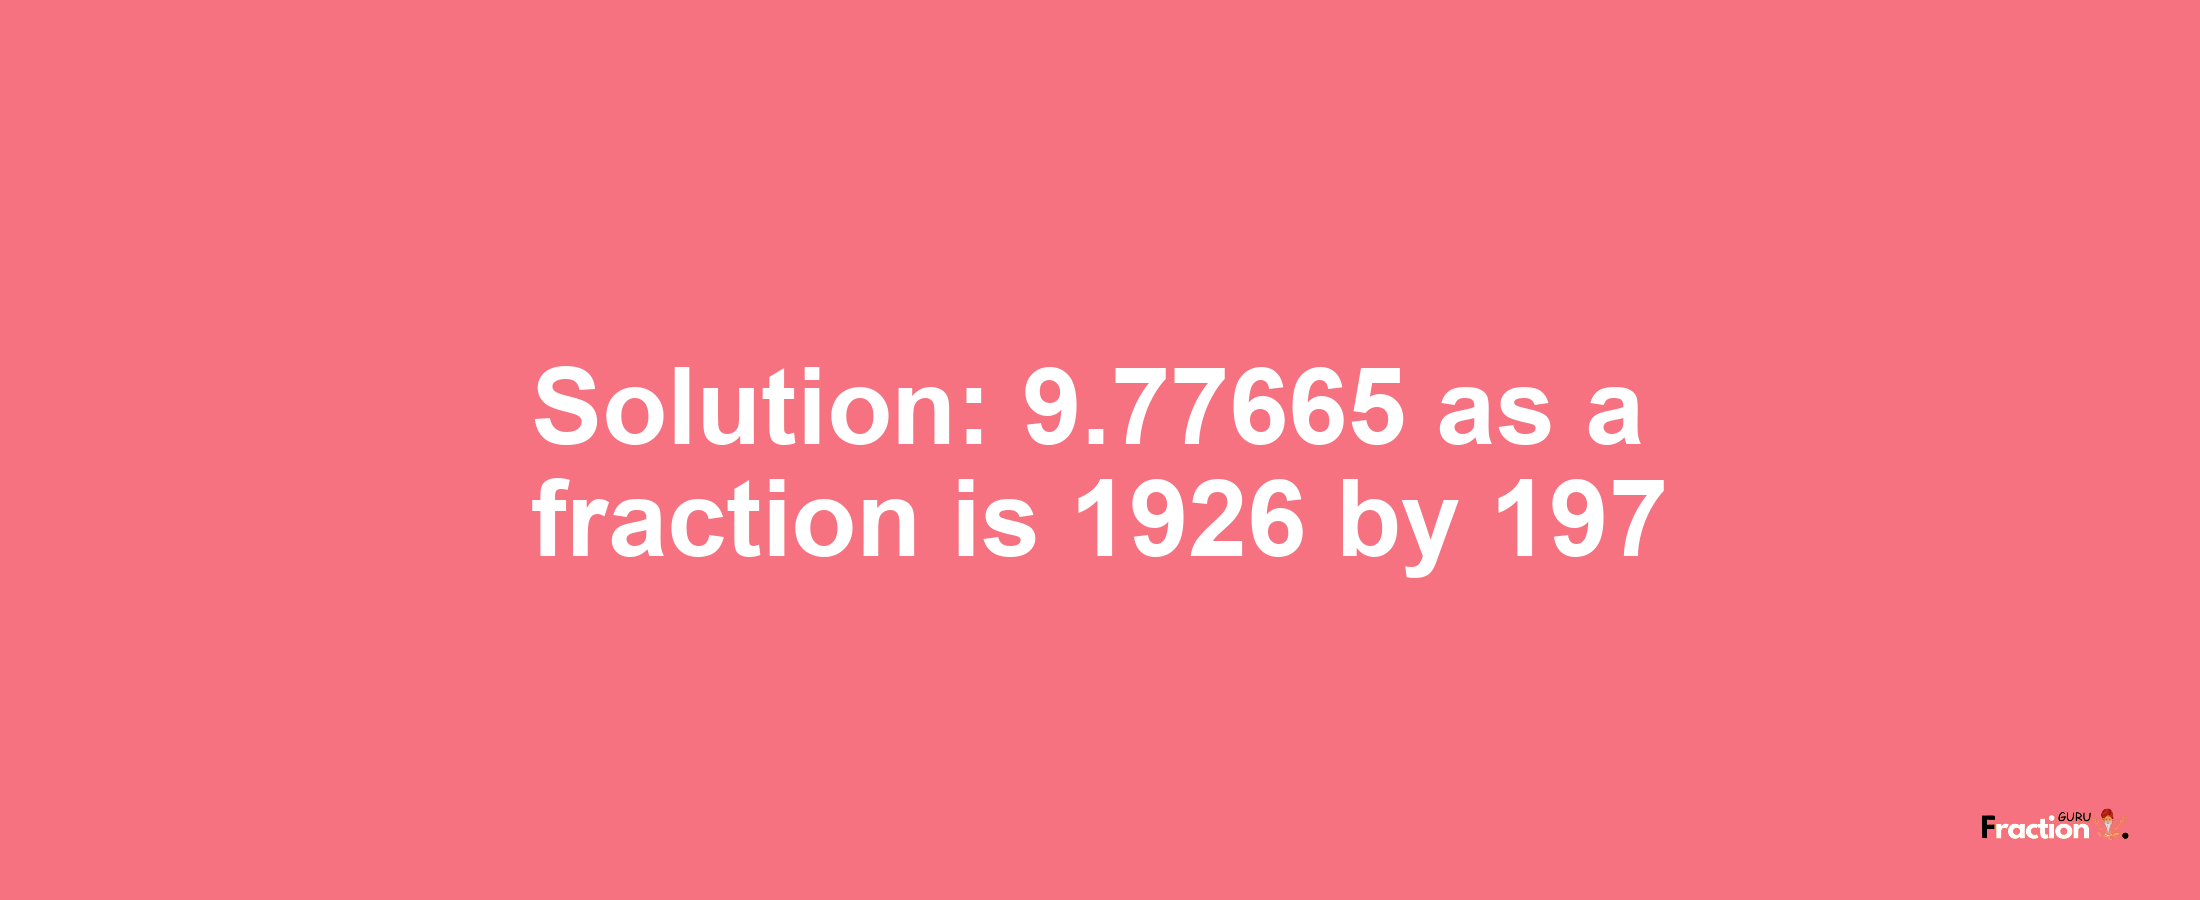 Solution:9.77665 as a fraction is 1926/197